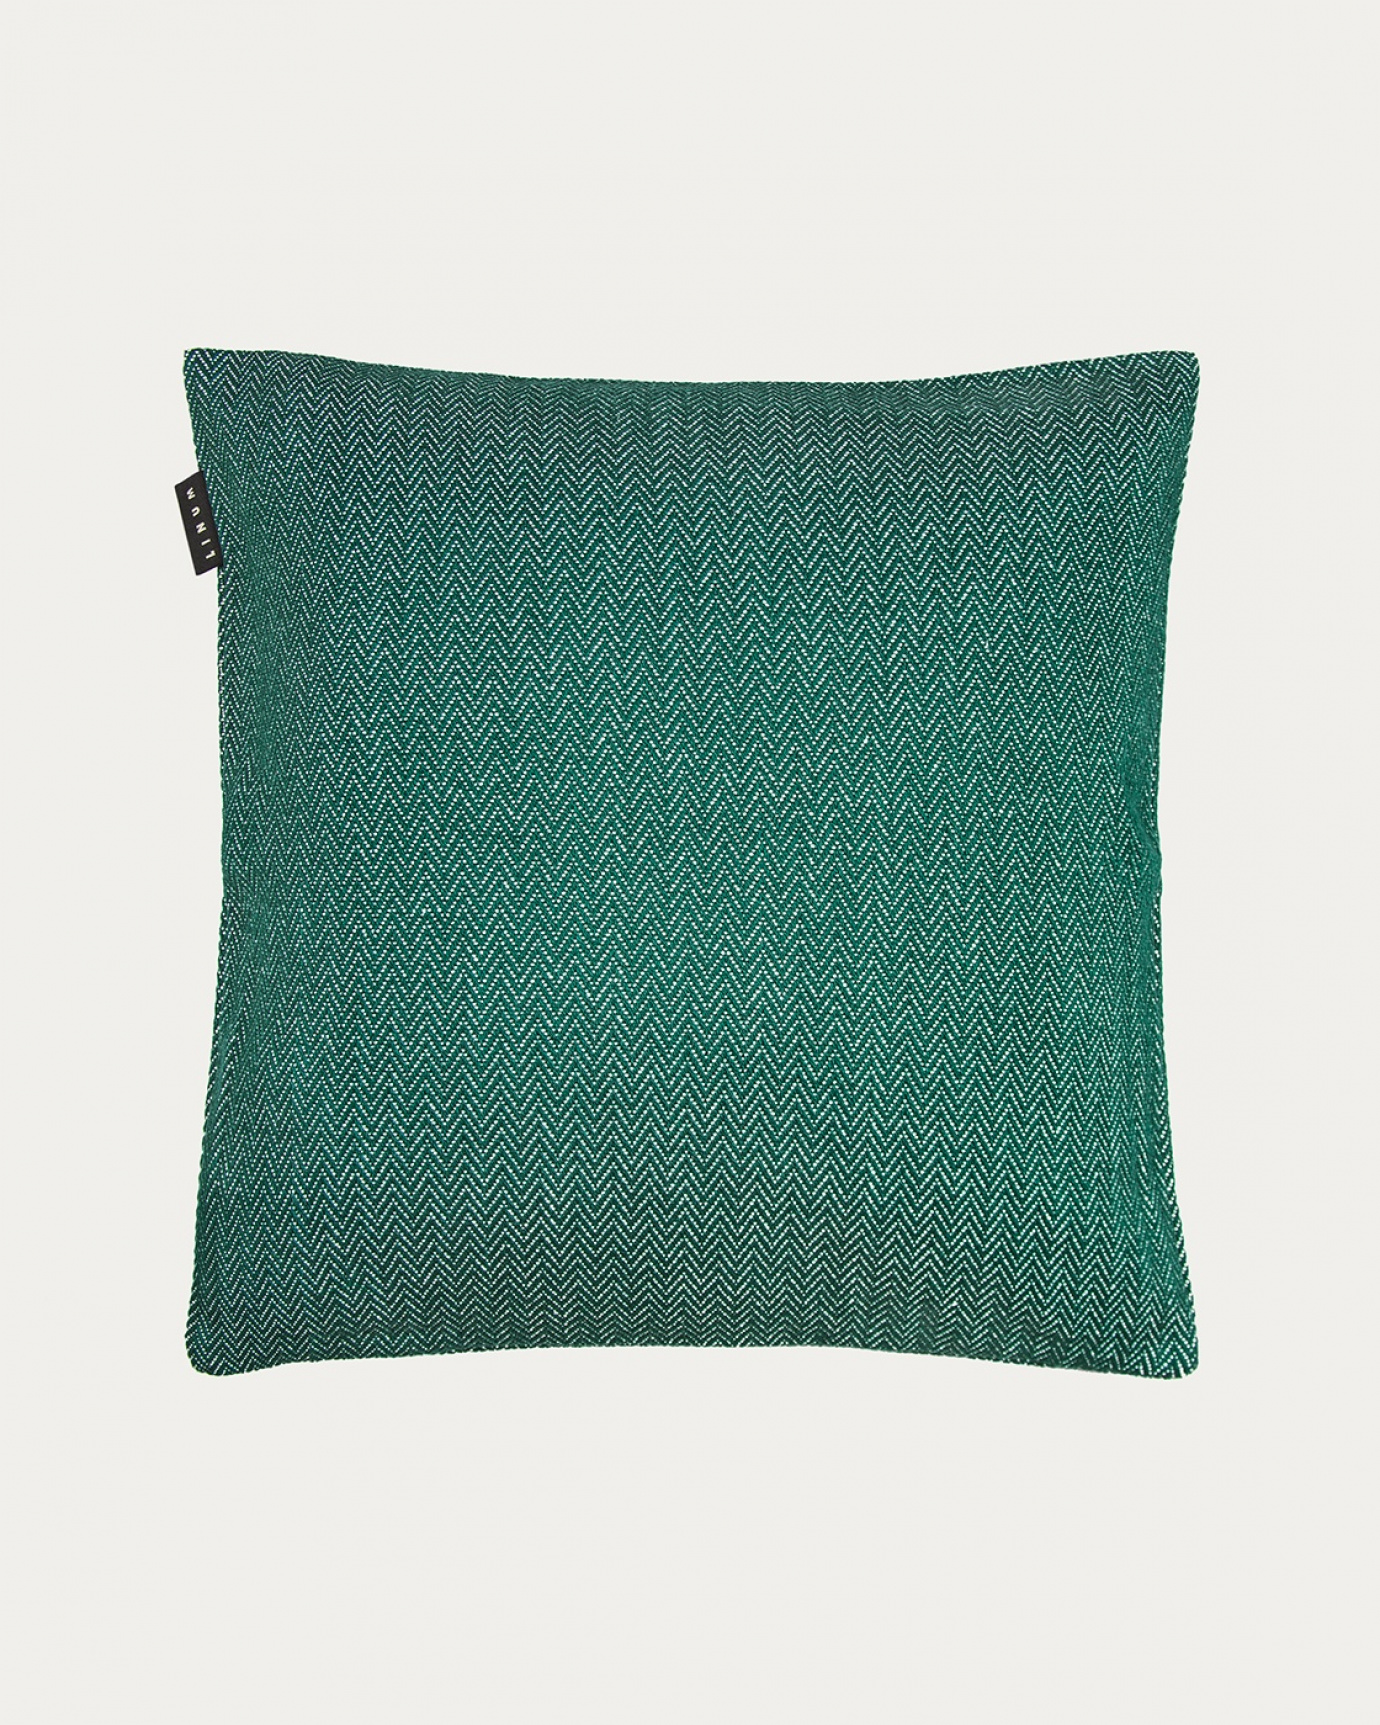 Product image deep emerald green SHEPARD cushion cover made of soft cotton with a discreet herringbone pattern from LINUM DESIGN. Size 50x50 cm.